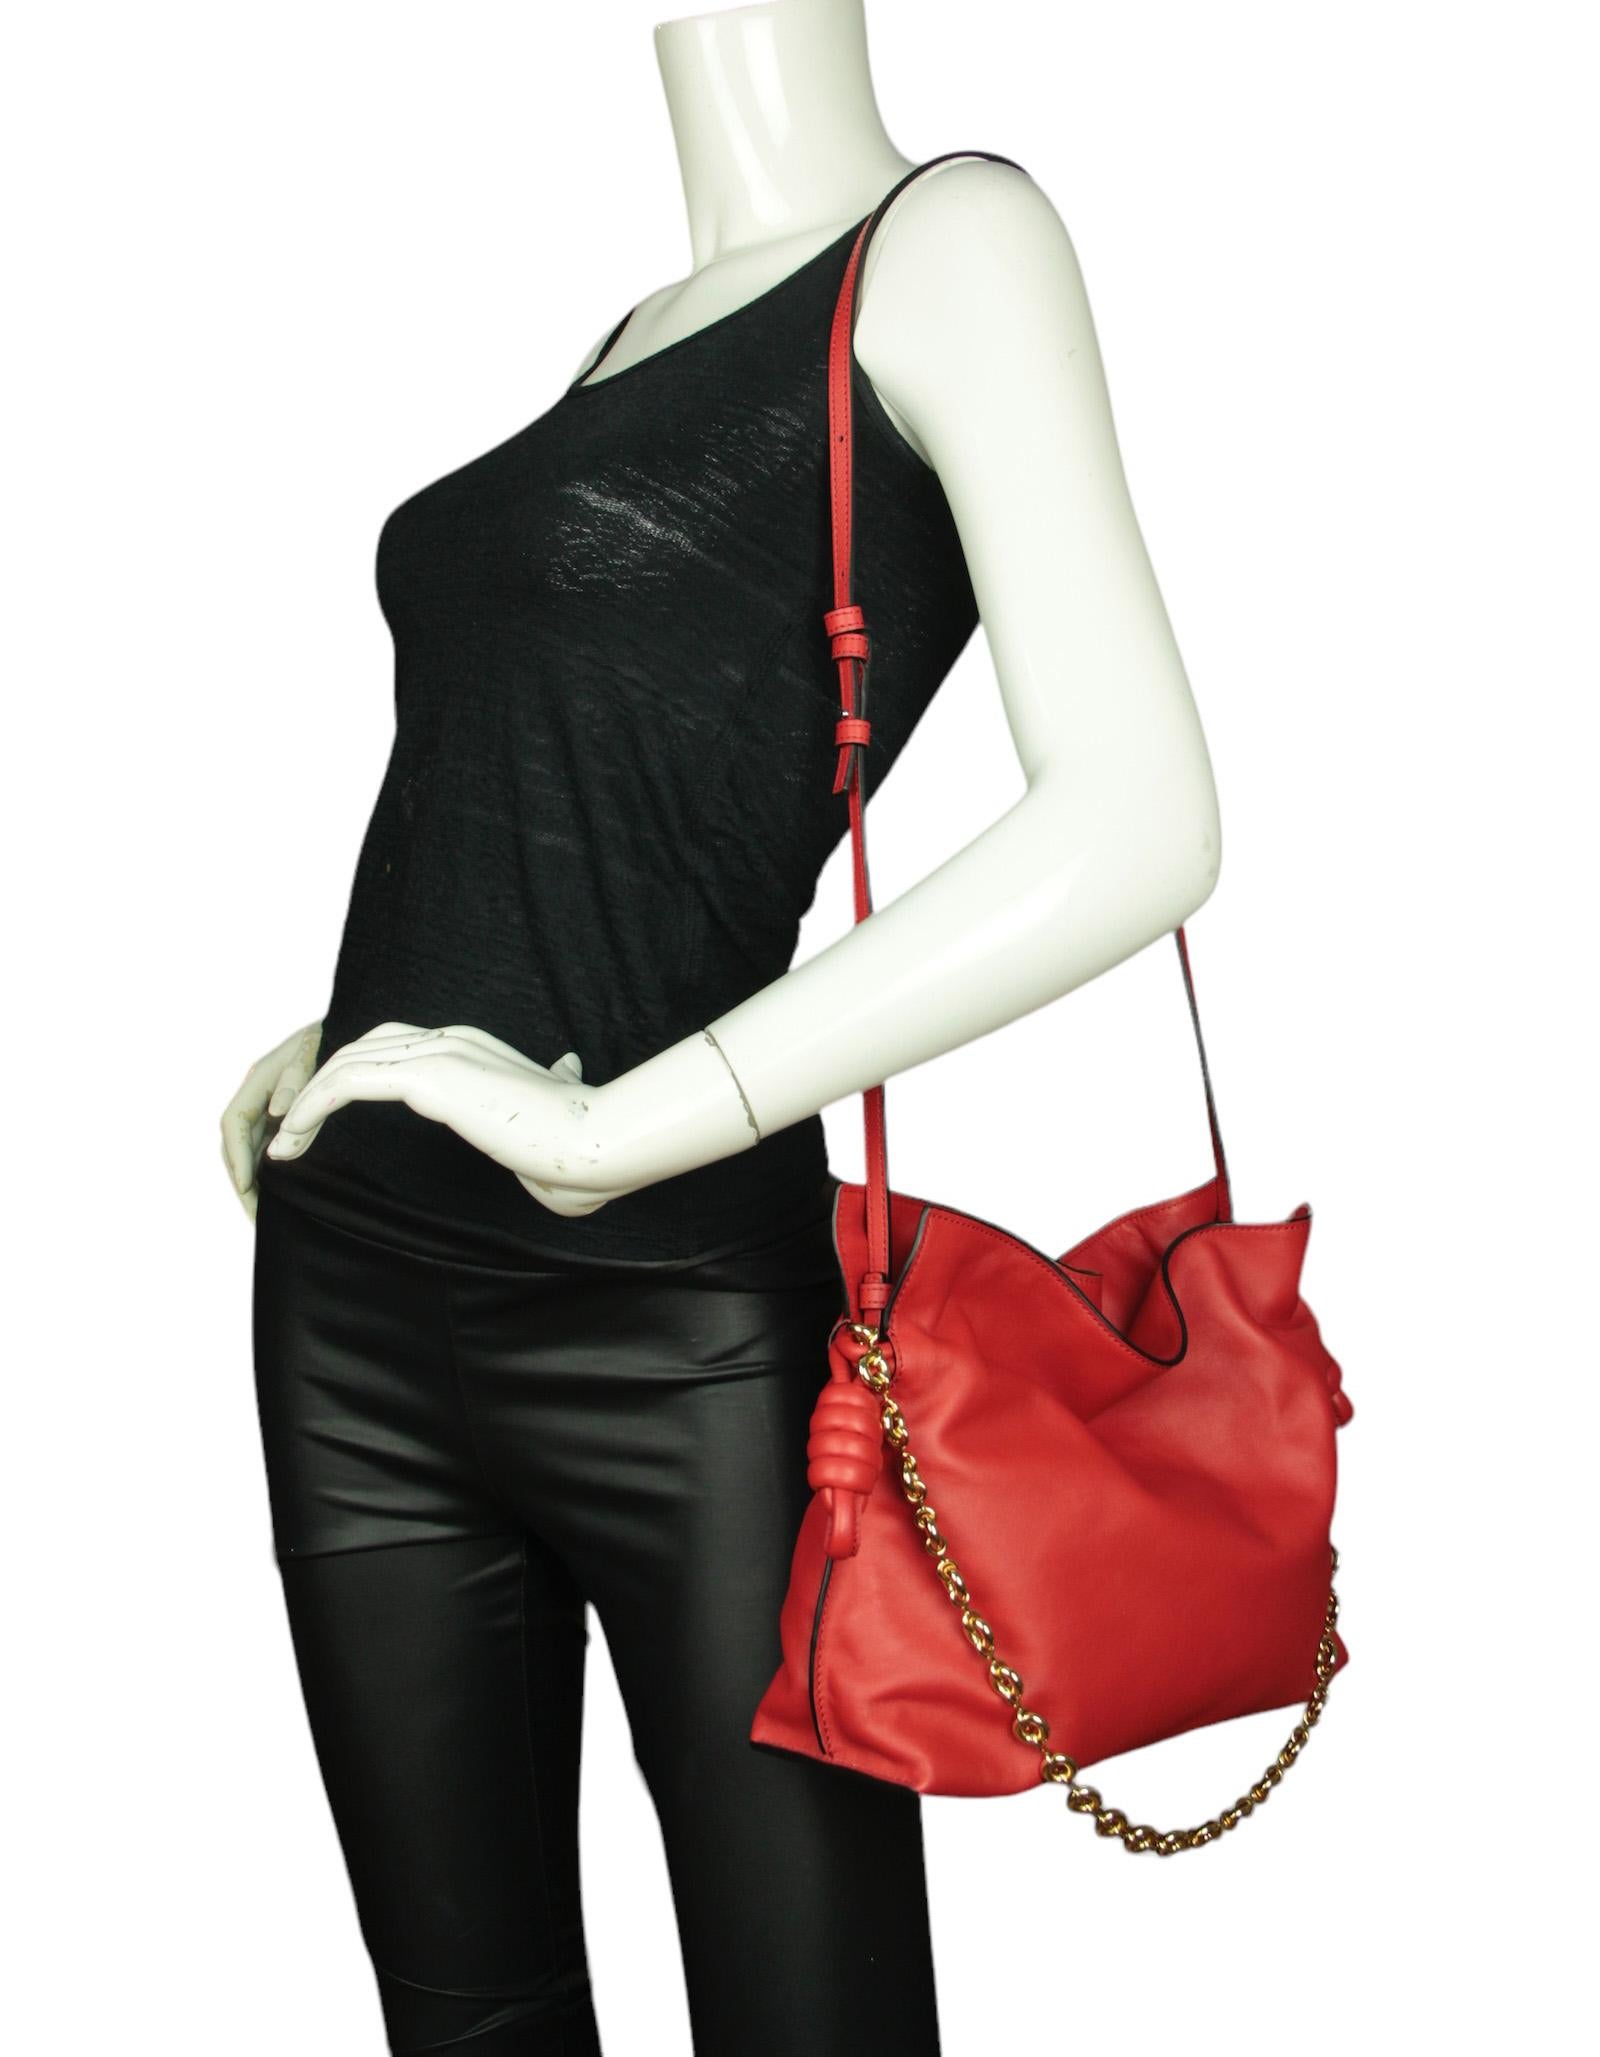 Loewe Red Calfskin Leather Medium Flamenco Clutch Bag.  Features optional adjustable leather shoulder strap and metal 